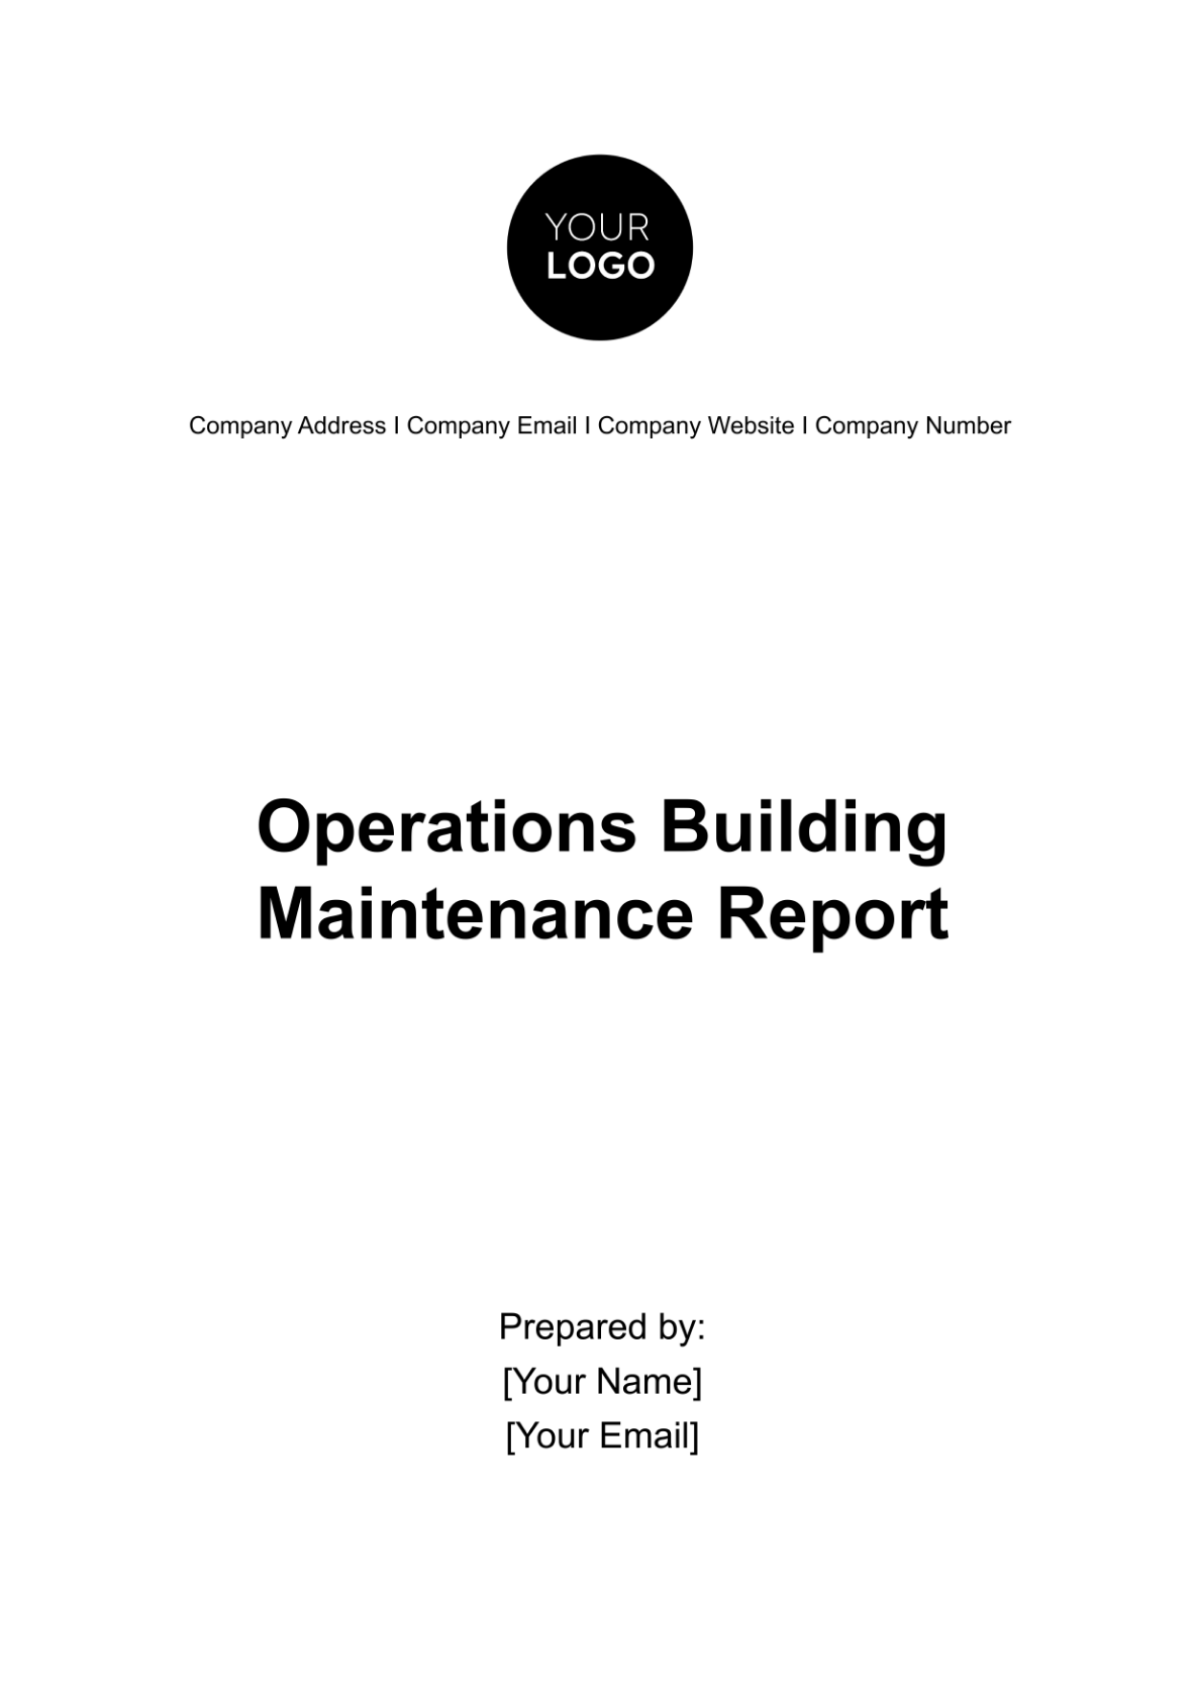 Operations Building Maintenance Report Template